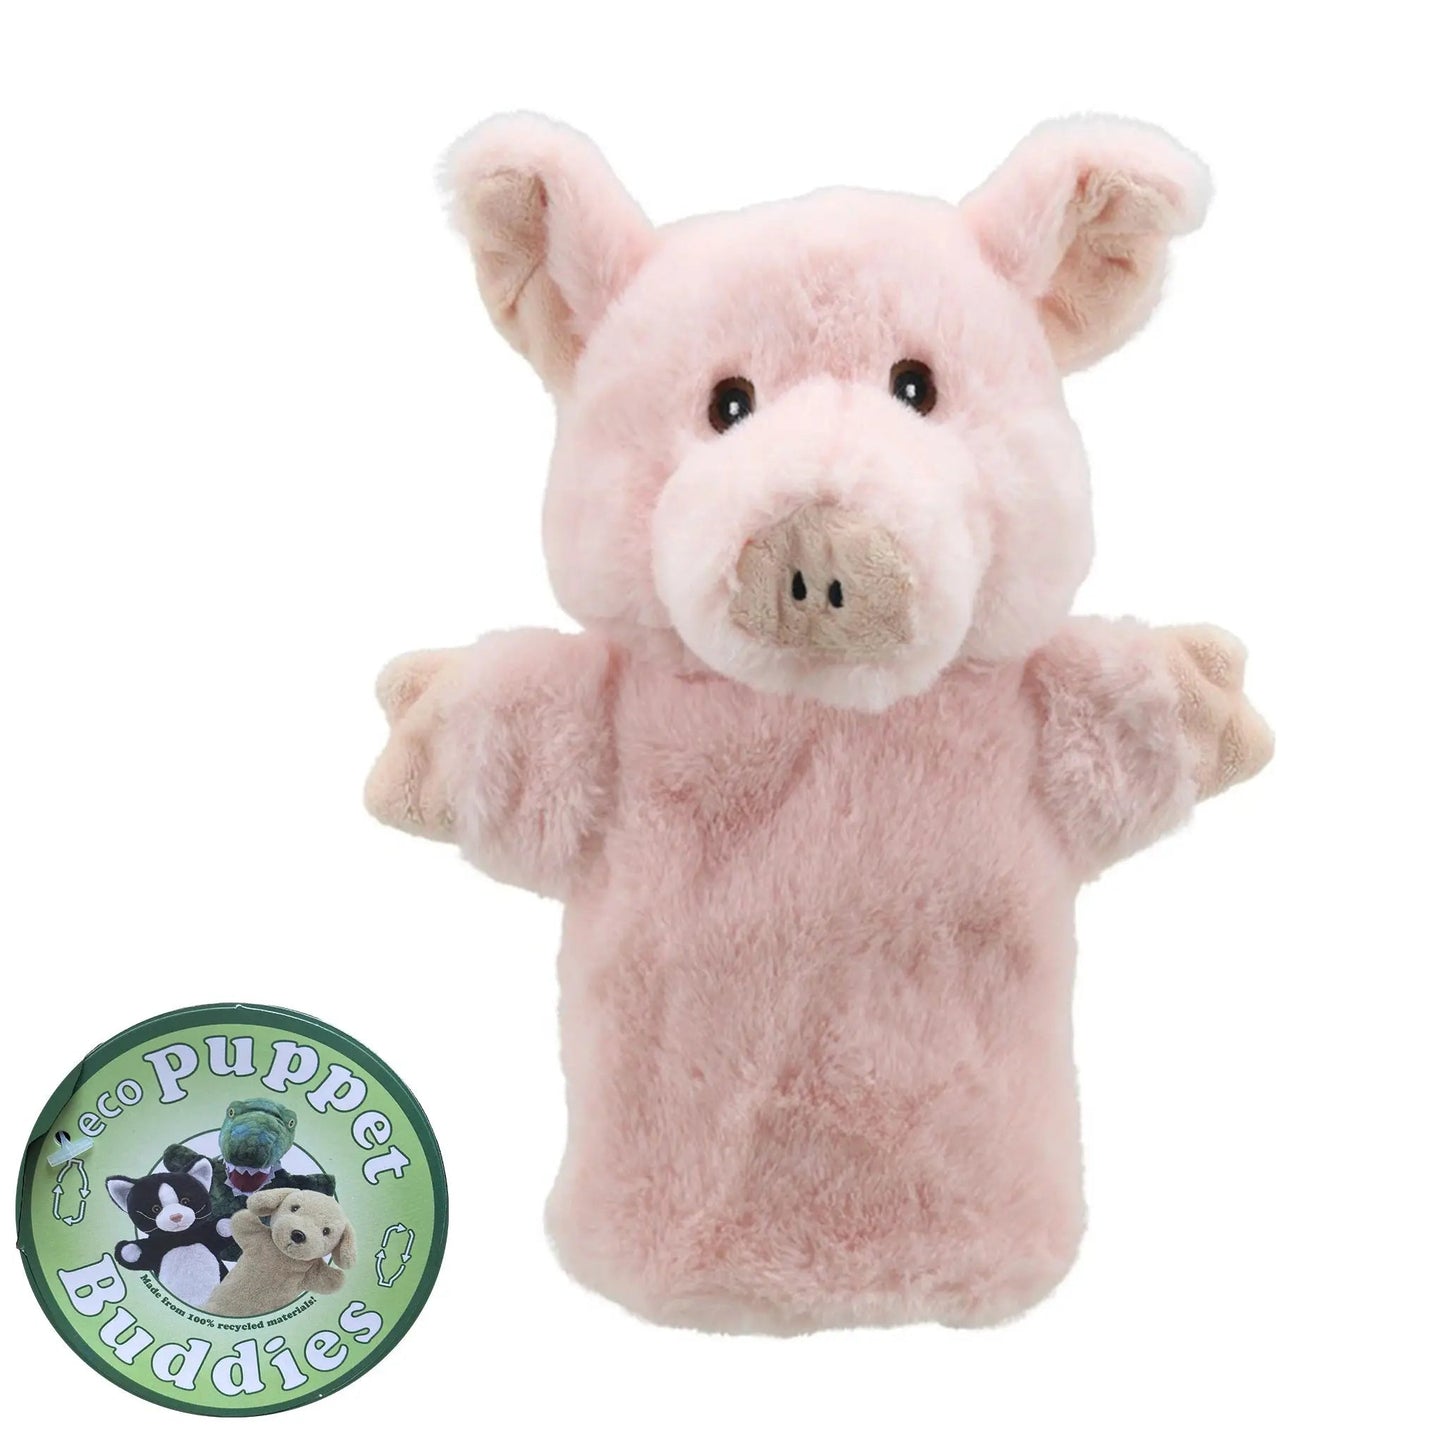 Pig Eco Puppet Buddies Hand Puppet - The Puppet Company - The Forgotten Toy Shop